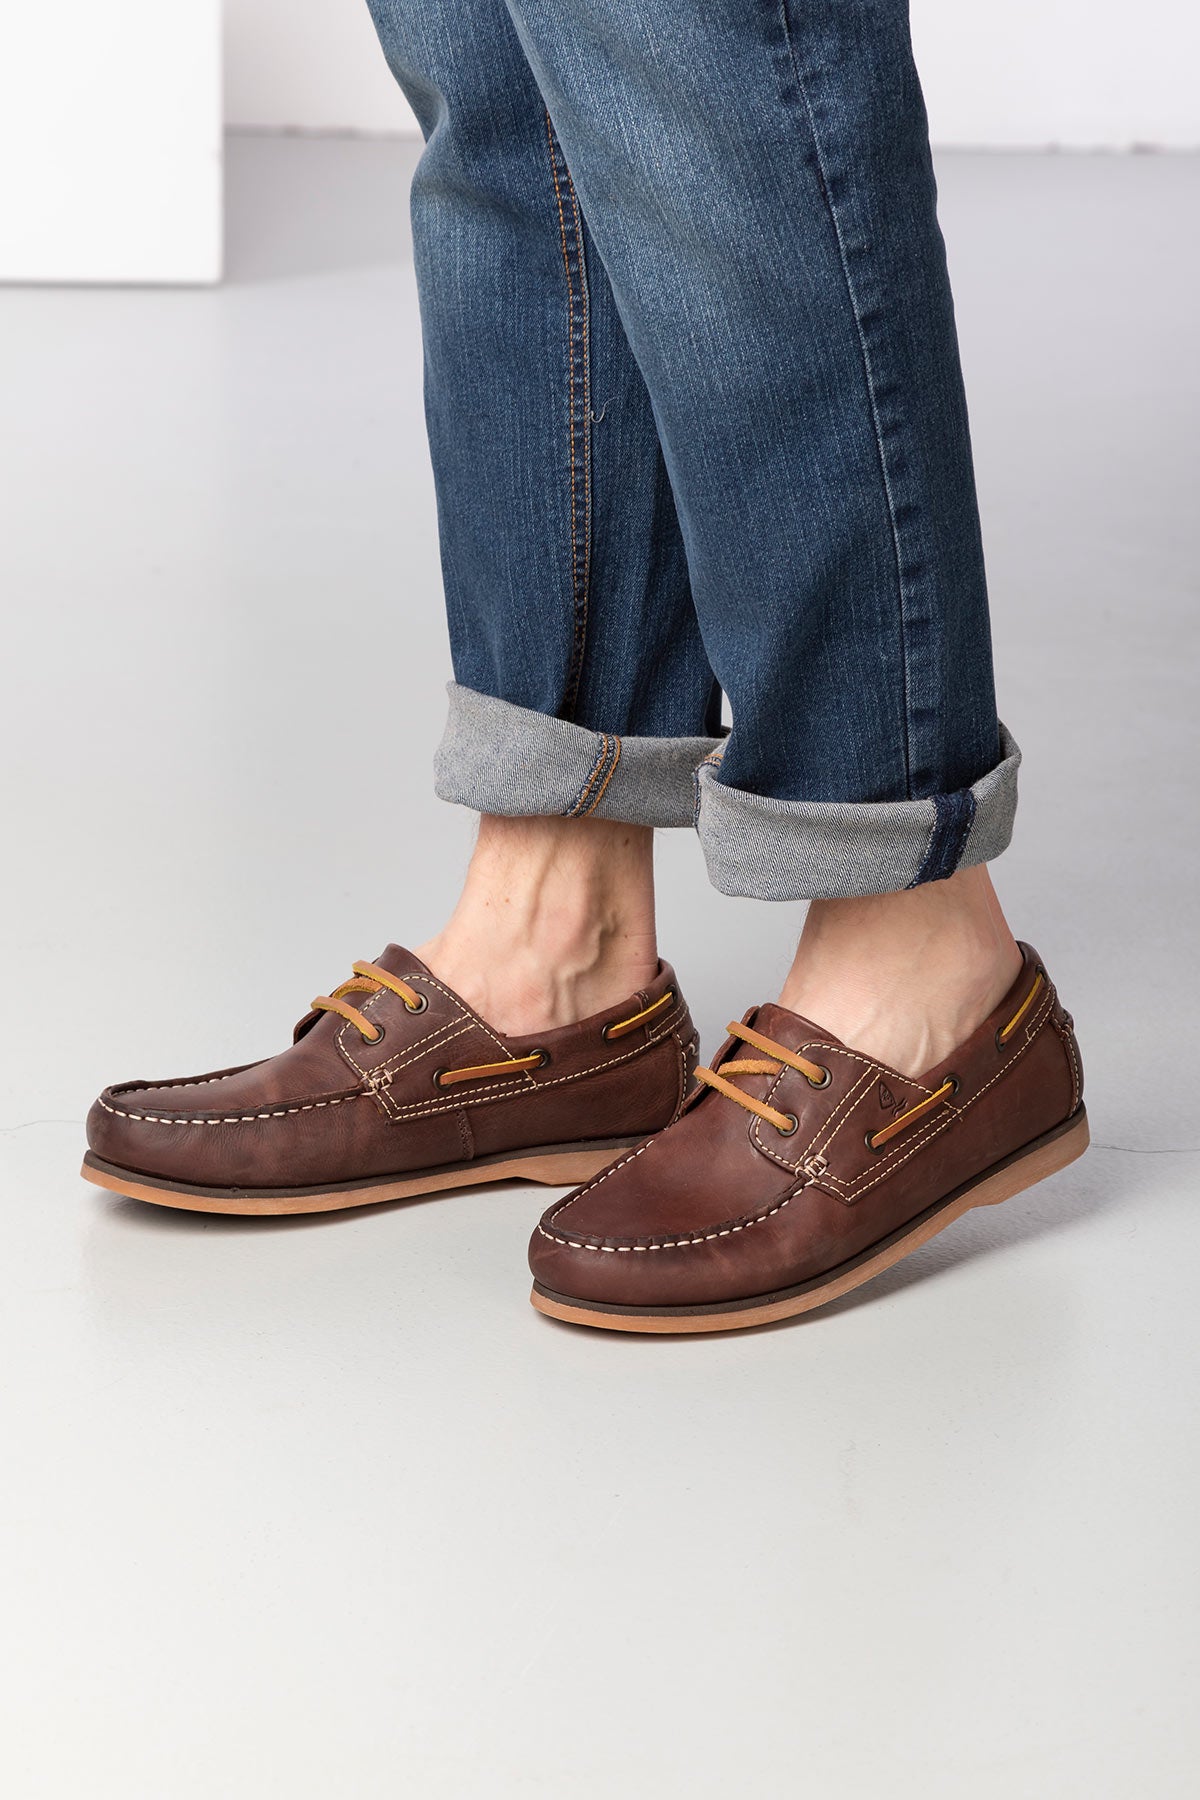 Mens Leather Deck Shoes UK | Rydale